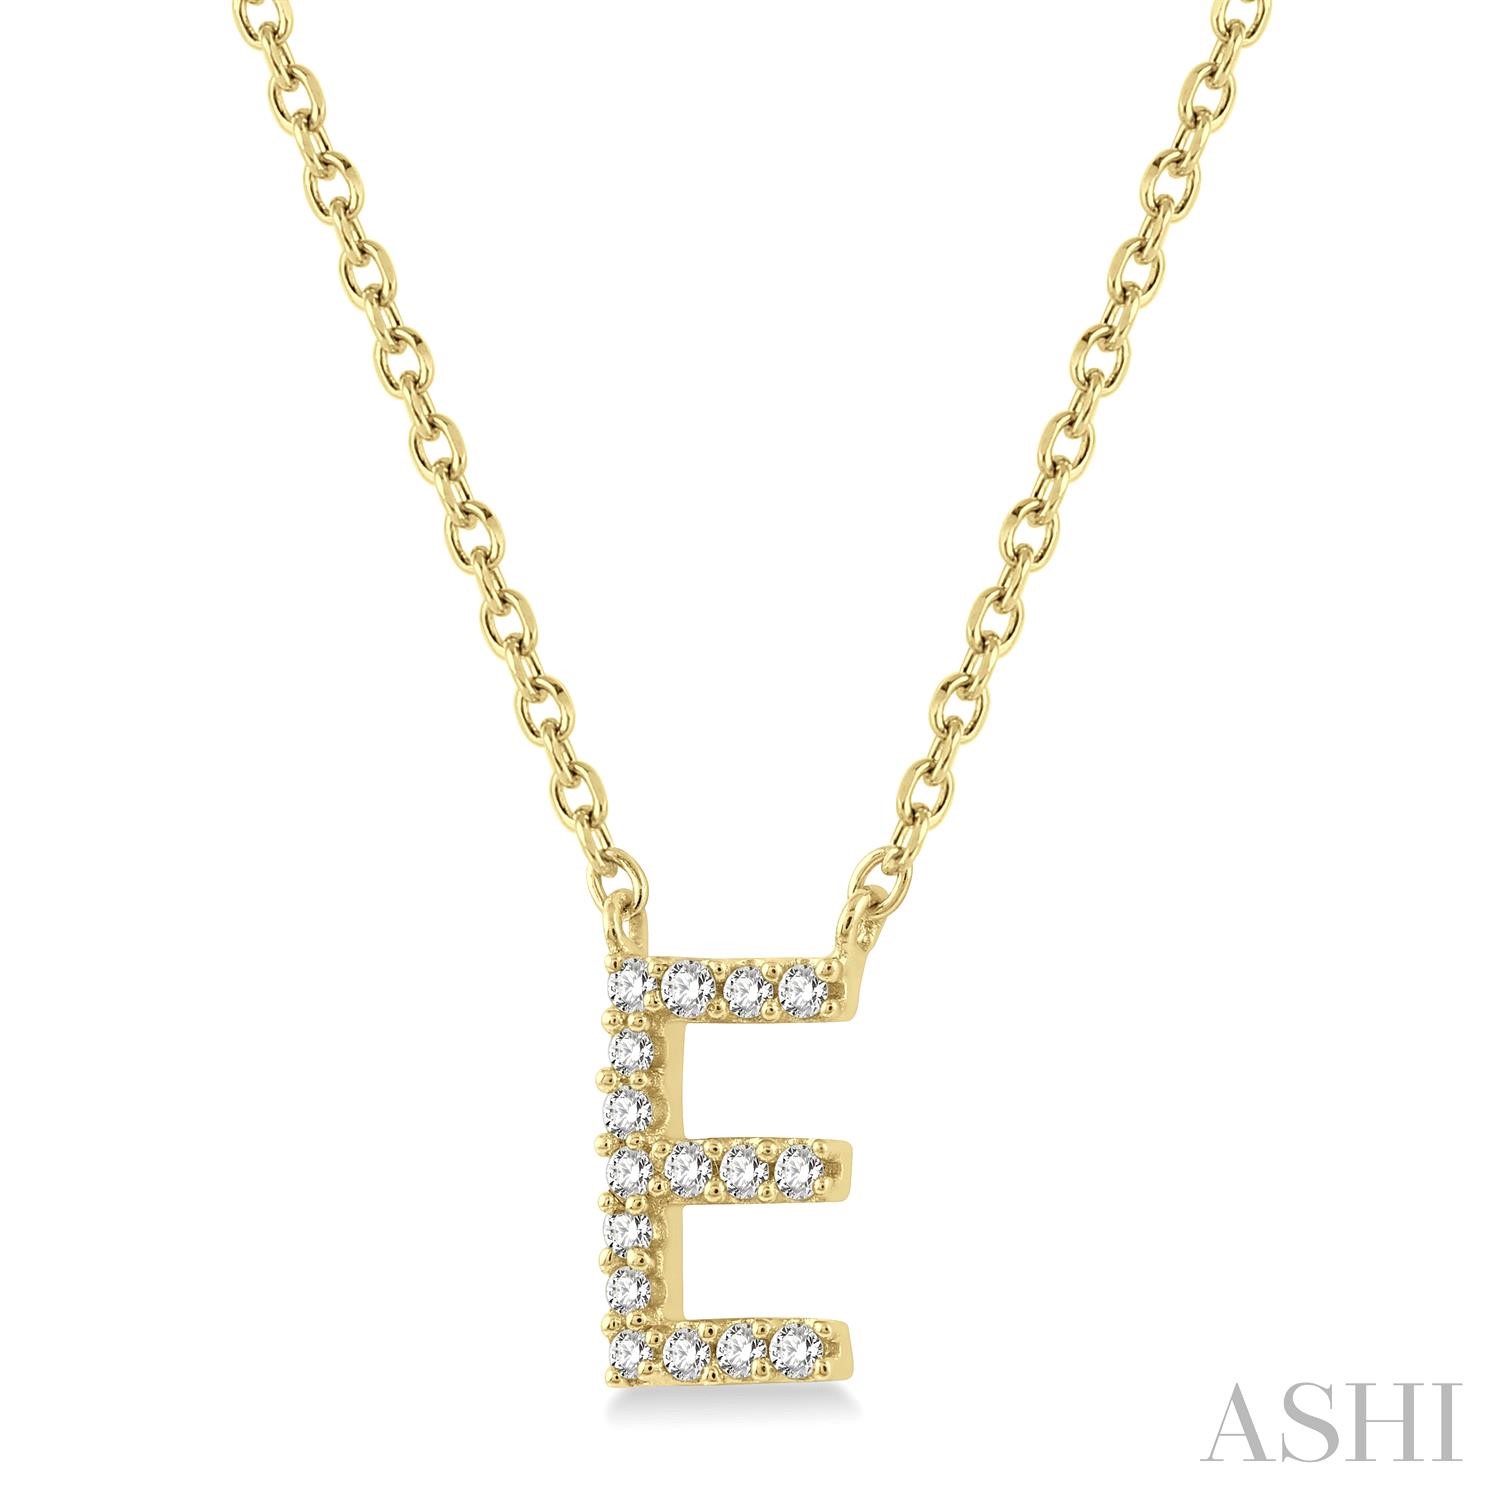 14K Yellow Gold Dashing Diamond 7-Stone Cable Chain Necklace